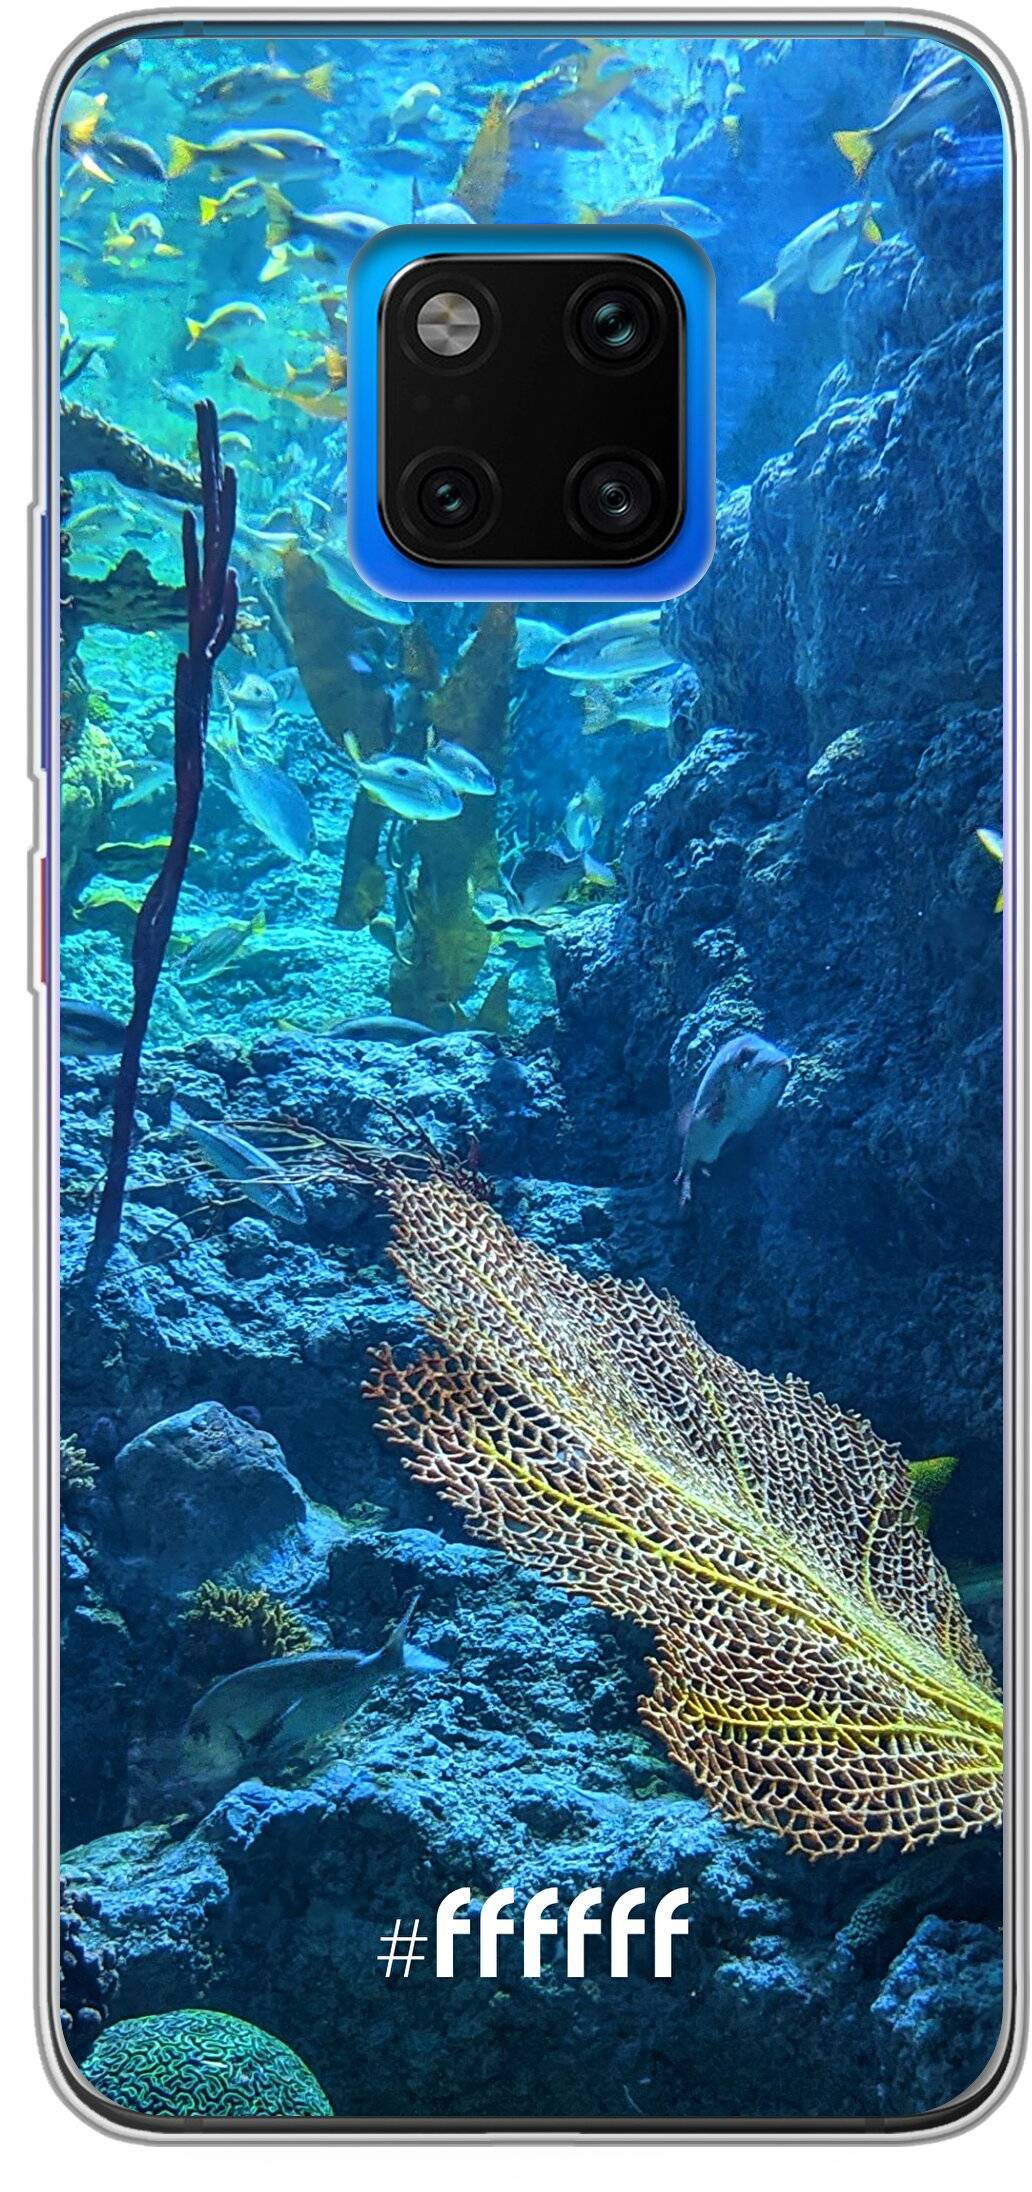 Coral Reef Mate 20 Pro